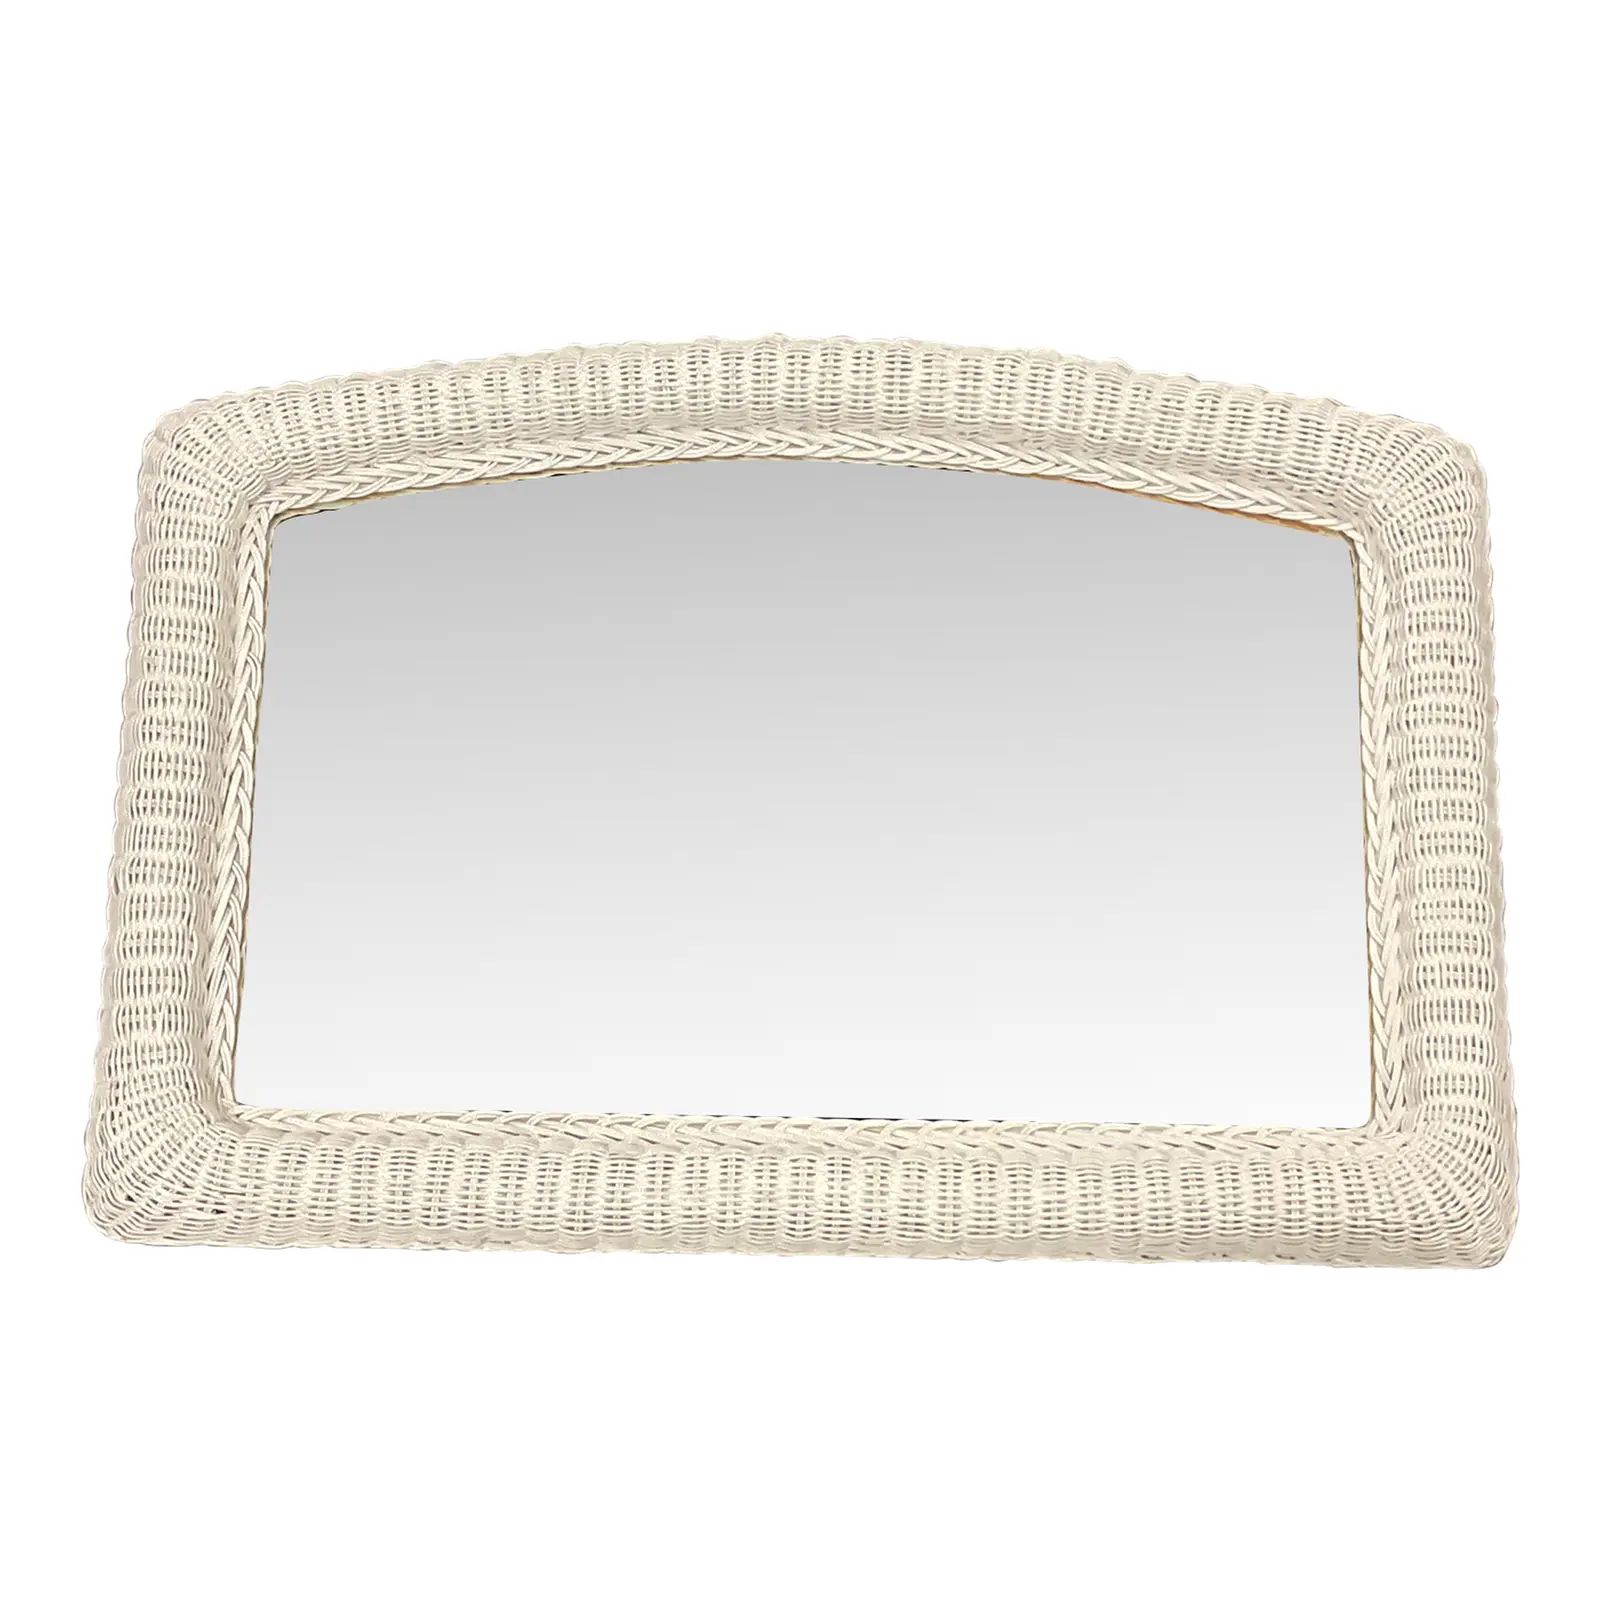 Vintage White Wicker Wall Mirror With Arched Design. | Chairish